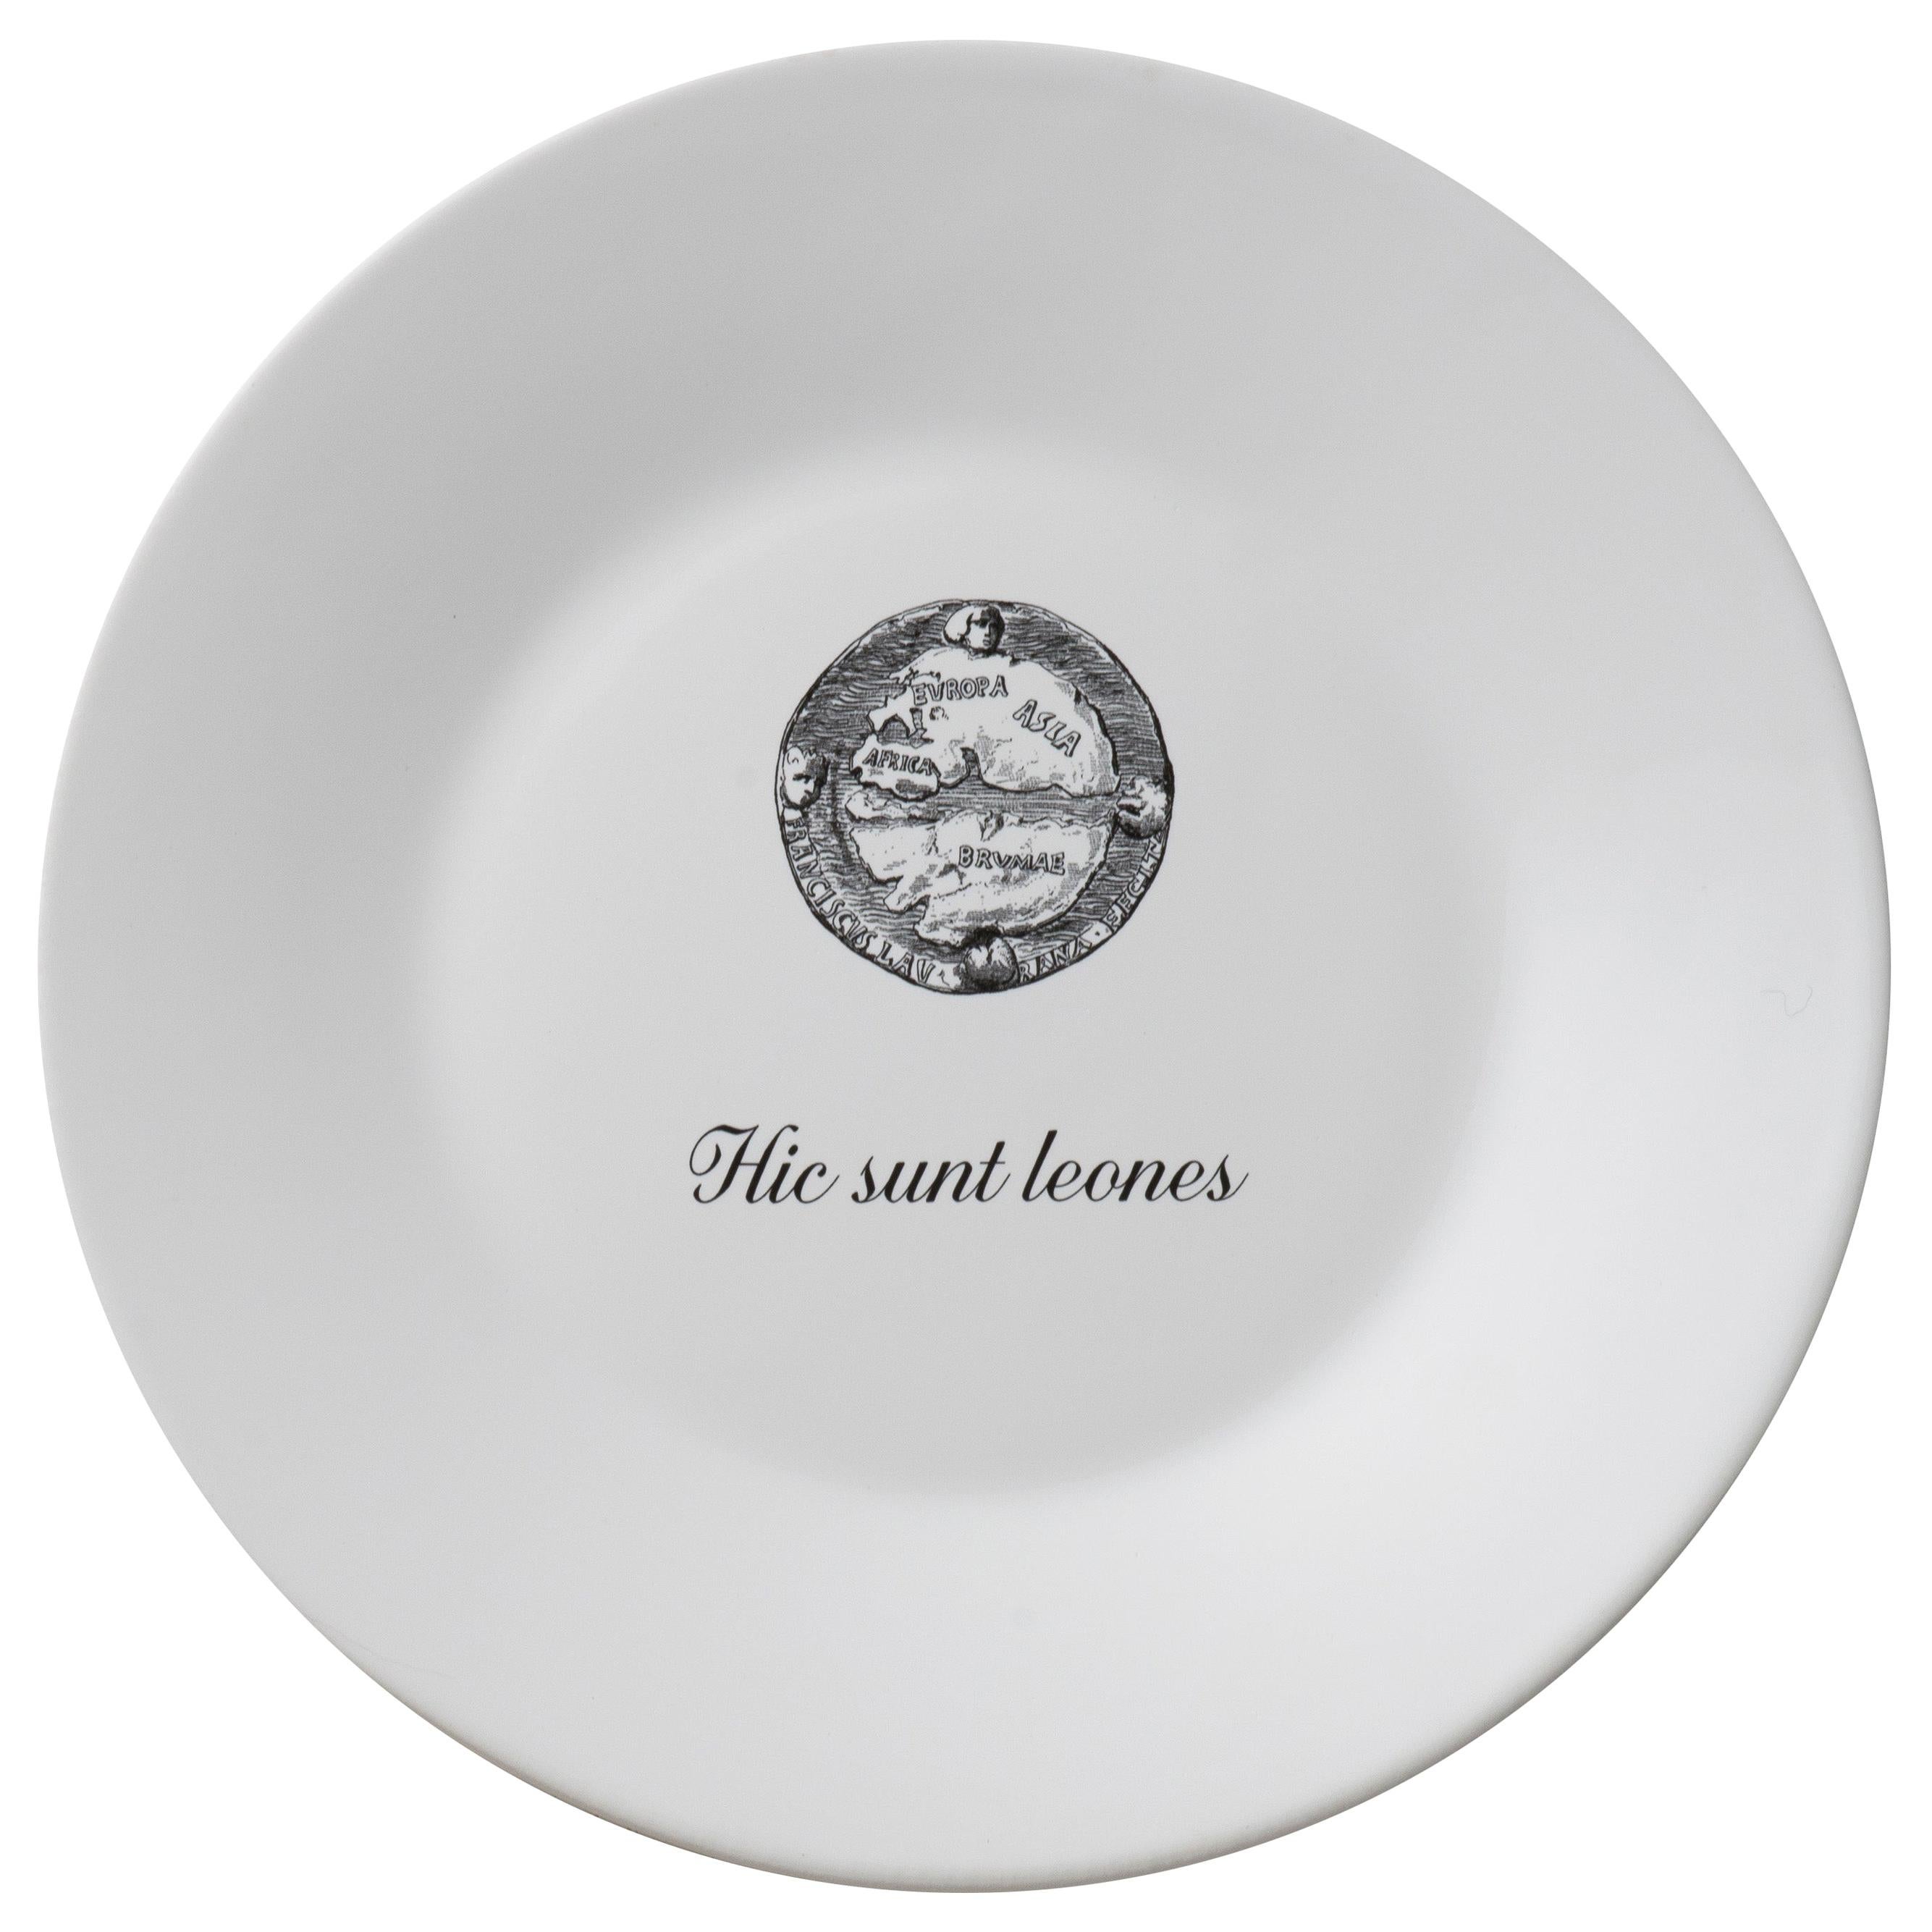 "Ipse Dixit" Crafted in Italy Set of Dessert Plates with Famous Latin Mottos For Sale